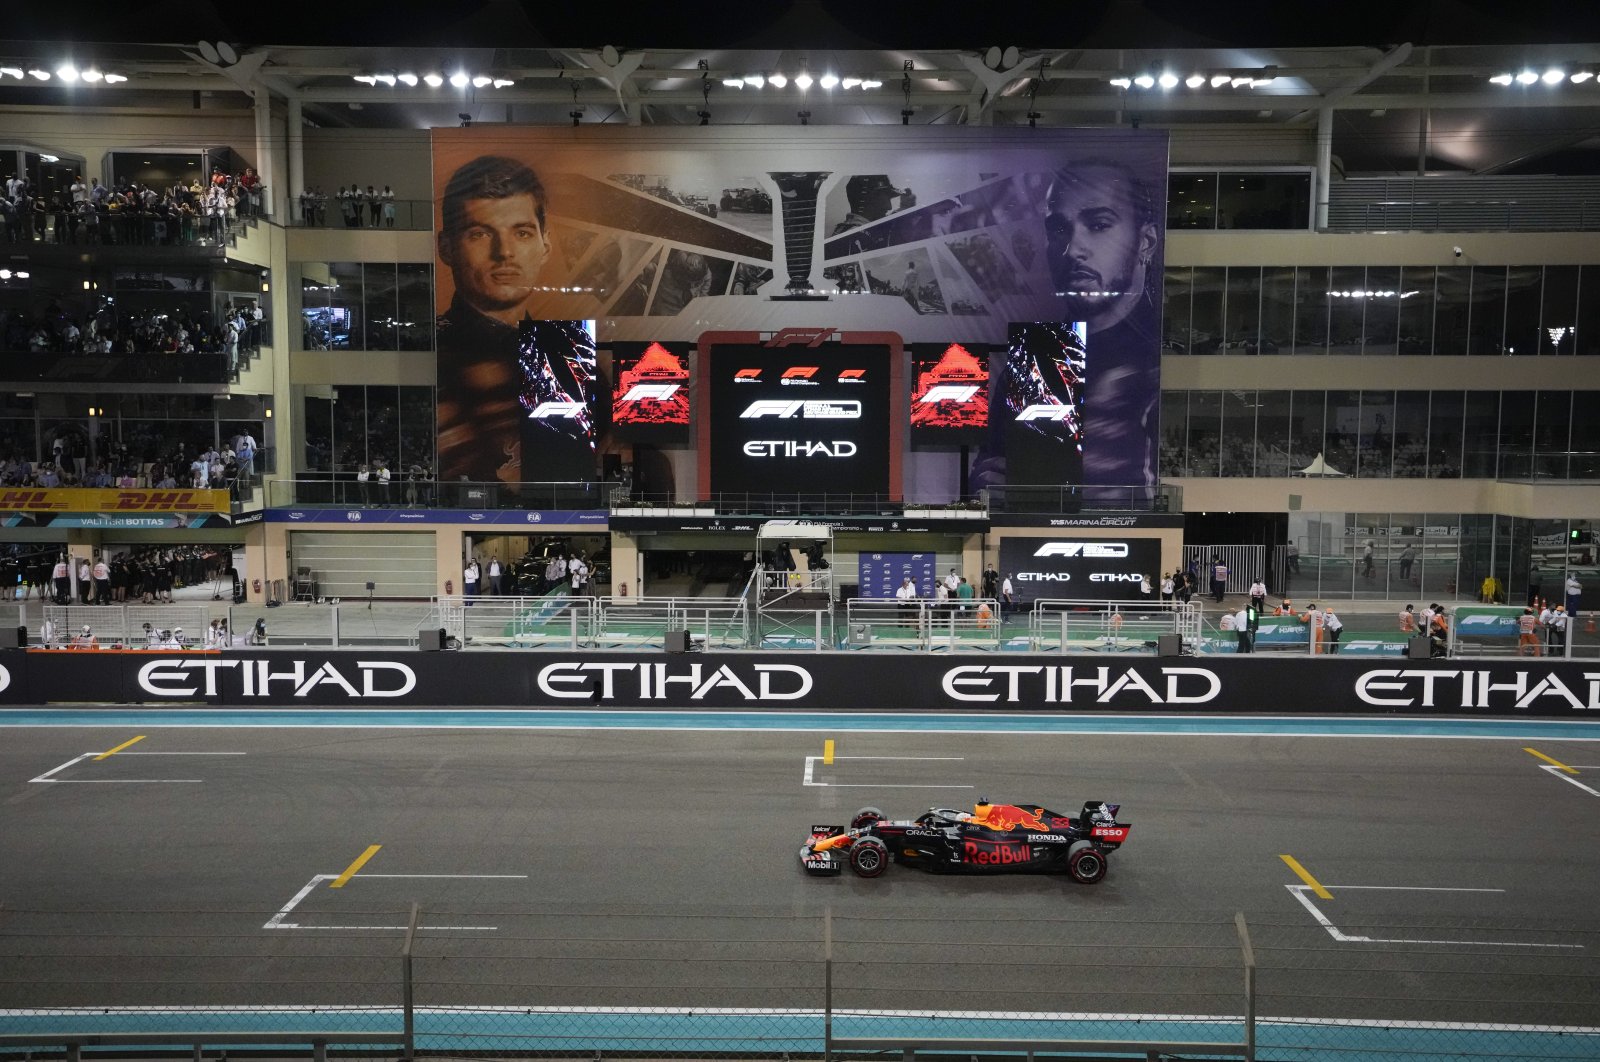 Red Bull driver Max Verstappen of the Netherlands in action during the qualifying for the Formula One Abu Dhabi Grand Prix in Abu Dhabi, United Arab Emirates, Dec. 11, 2021. (AP Photo)